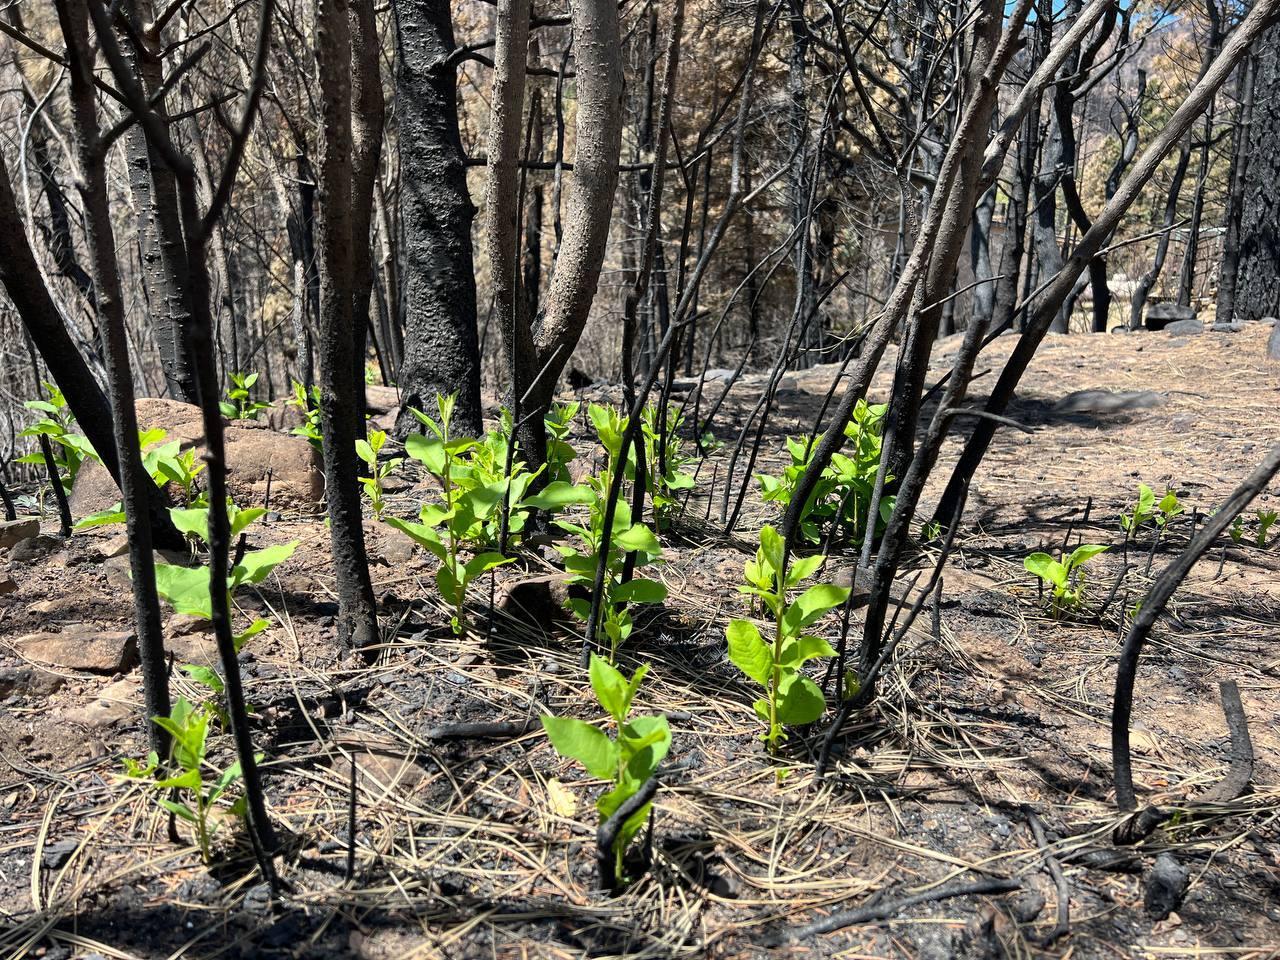 Burned, black ground and trees across landscape. Individual green plants begin to grow throughout the burned area.